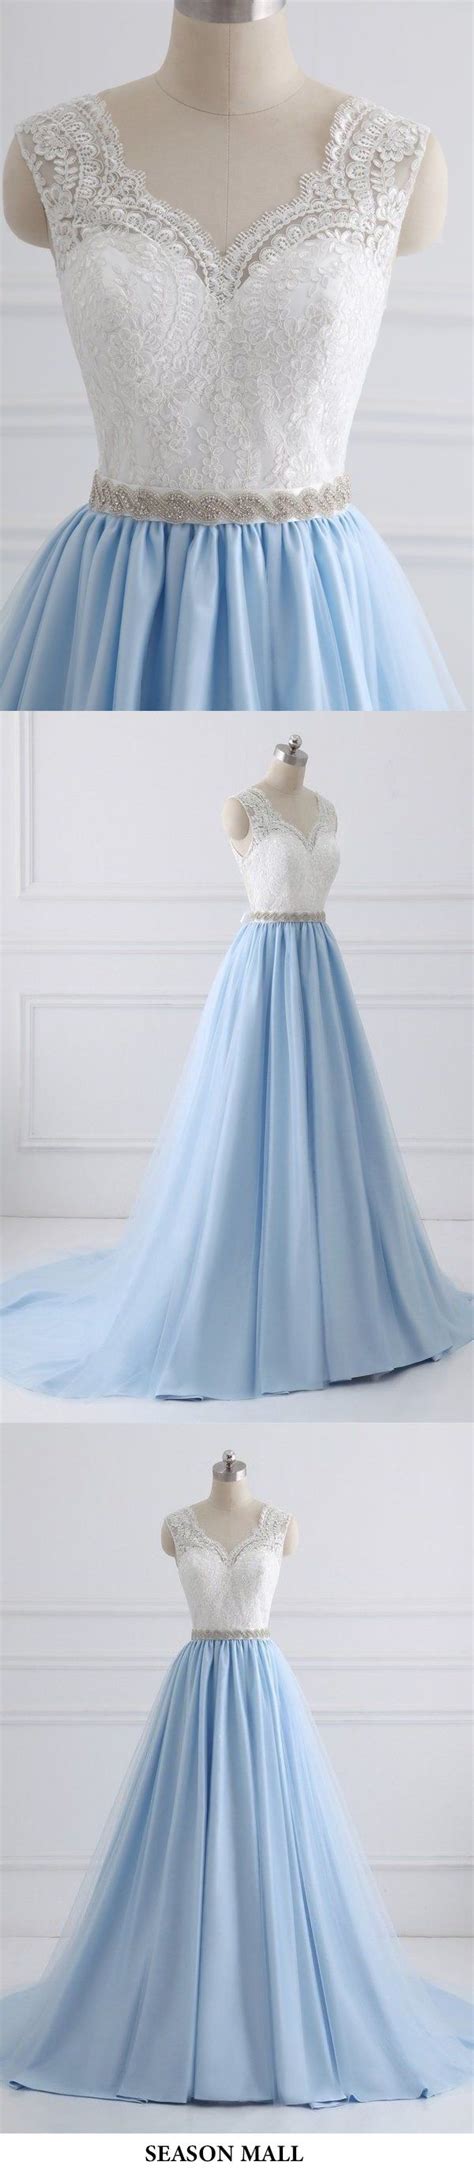 neck lace top sky blue skirt cheap sweetheart tulle satin prom dresses  sash blue